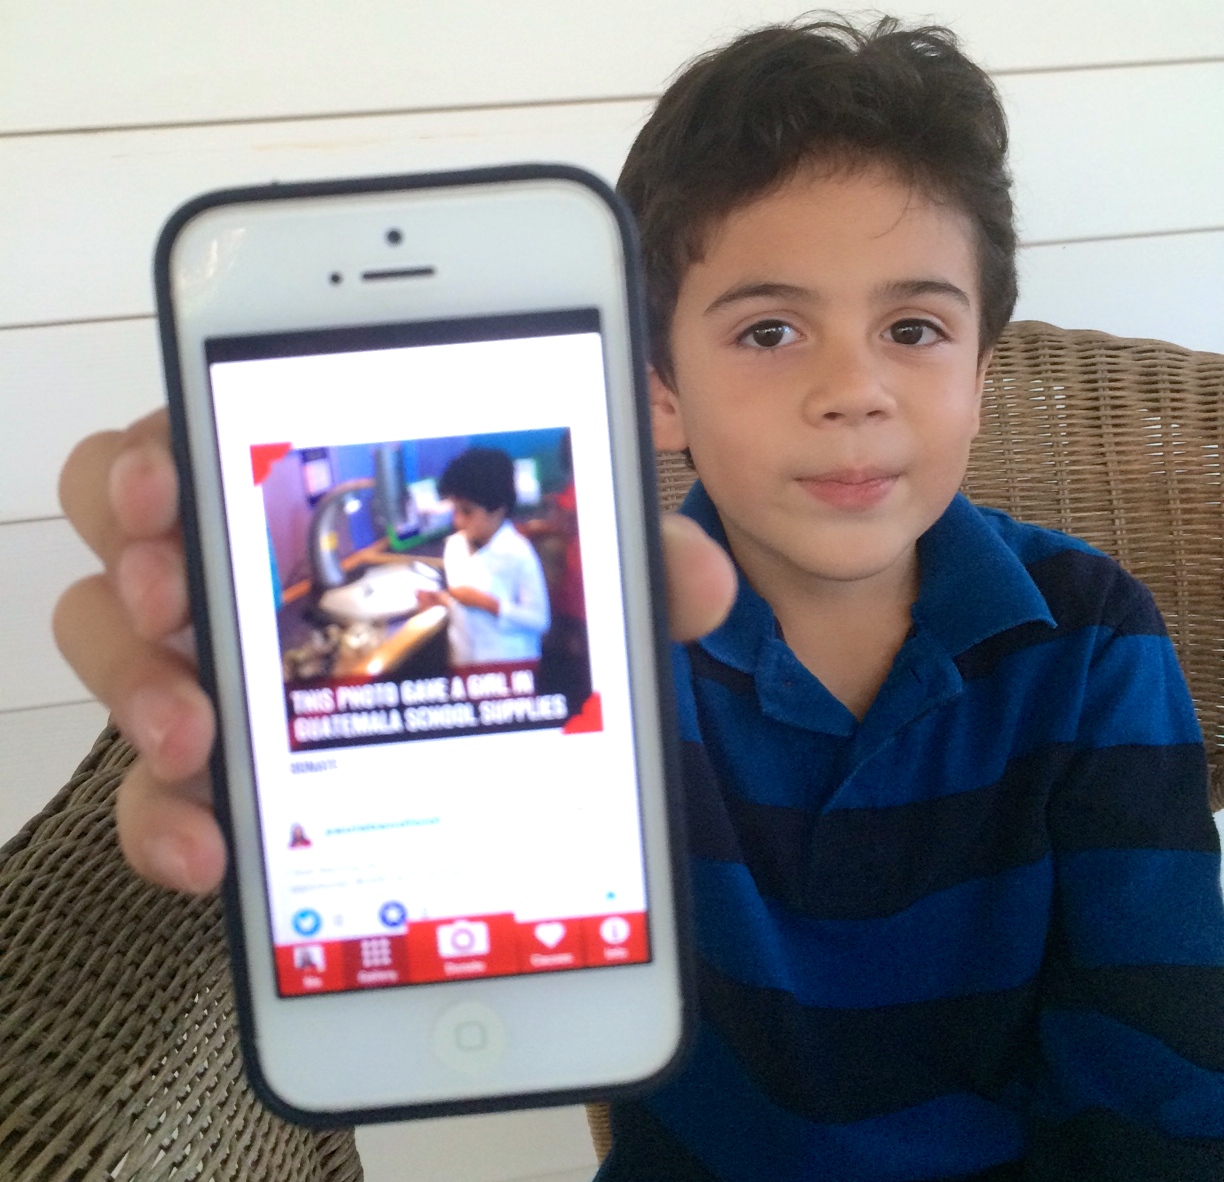 Teaching kids to give back with Donate a Photo app from Johnson & Johnson.